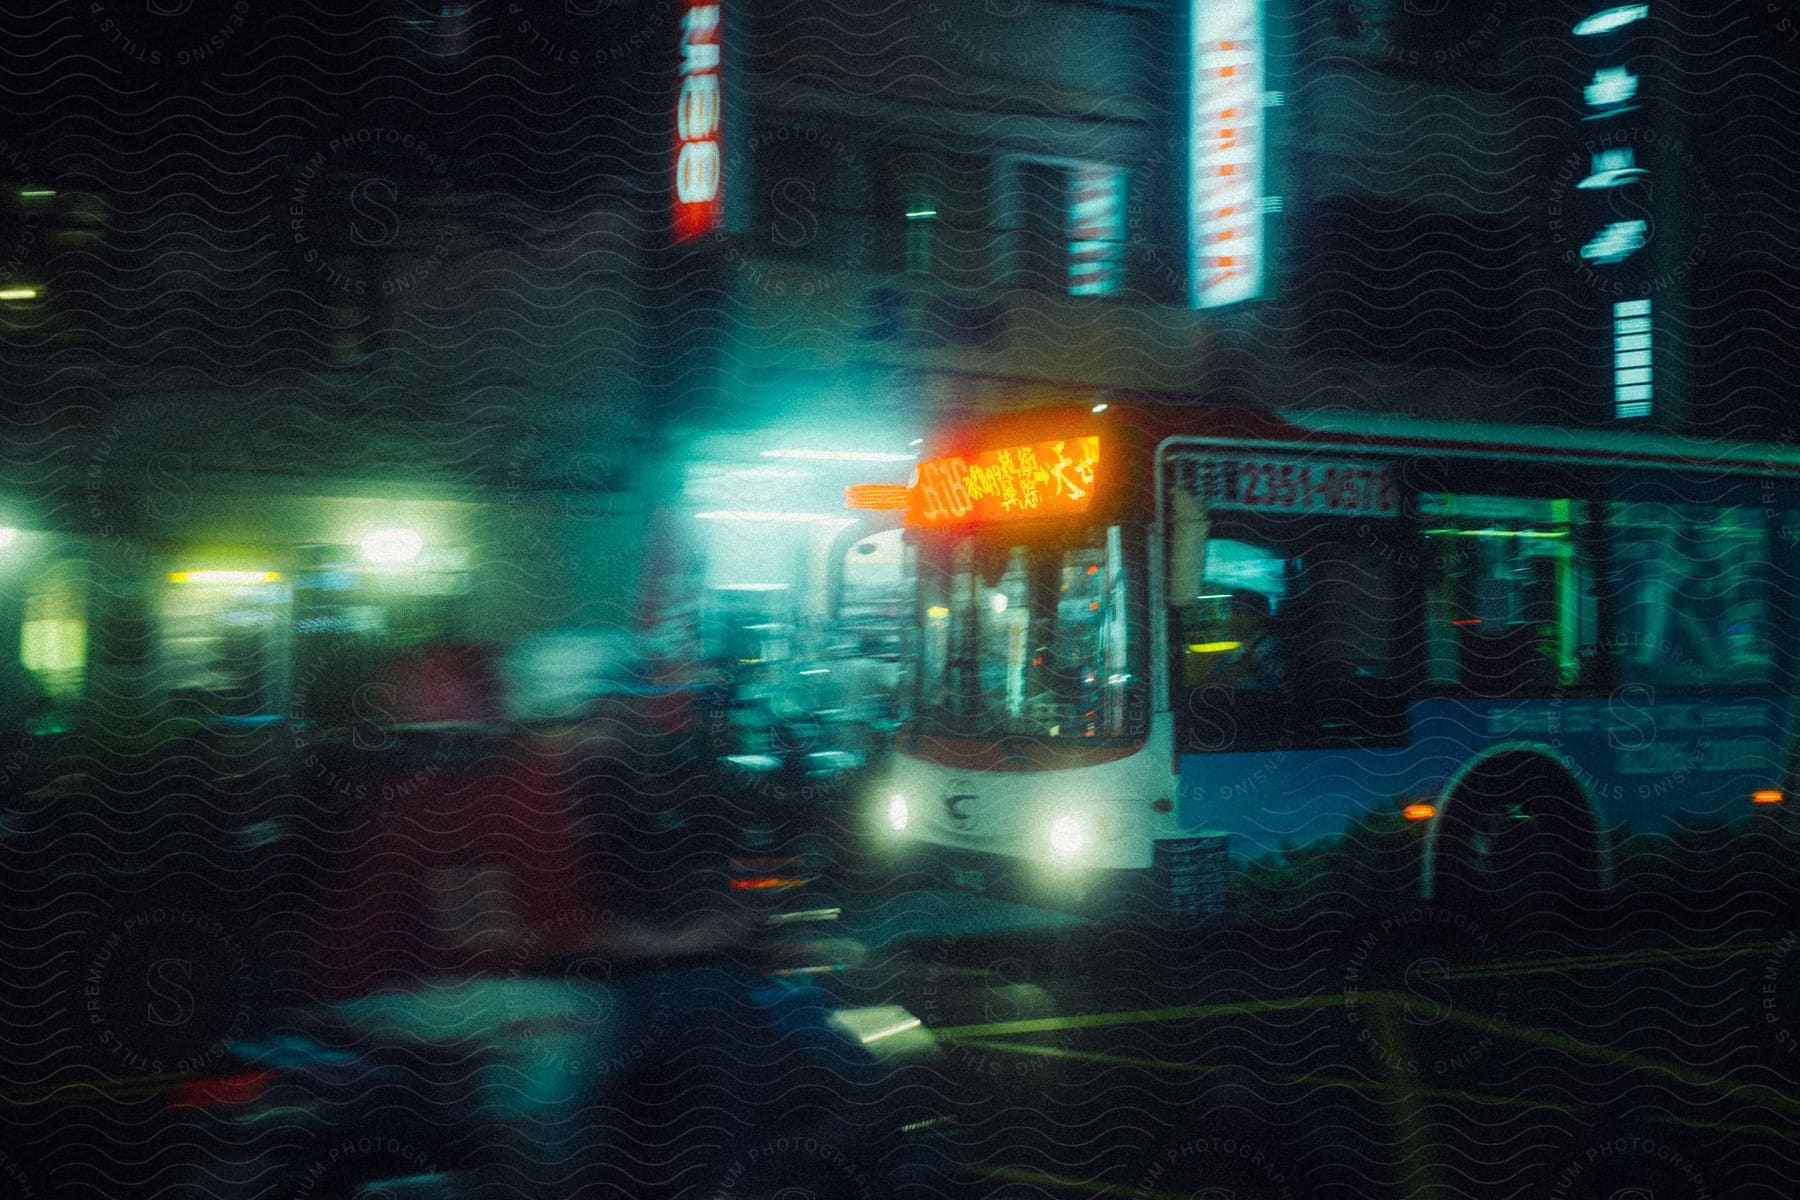 A cityscape of taiwan at night with buildings cars and buses